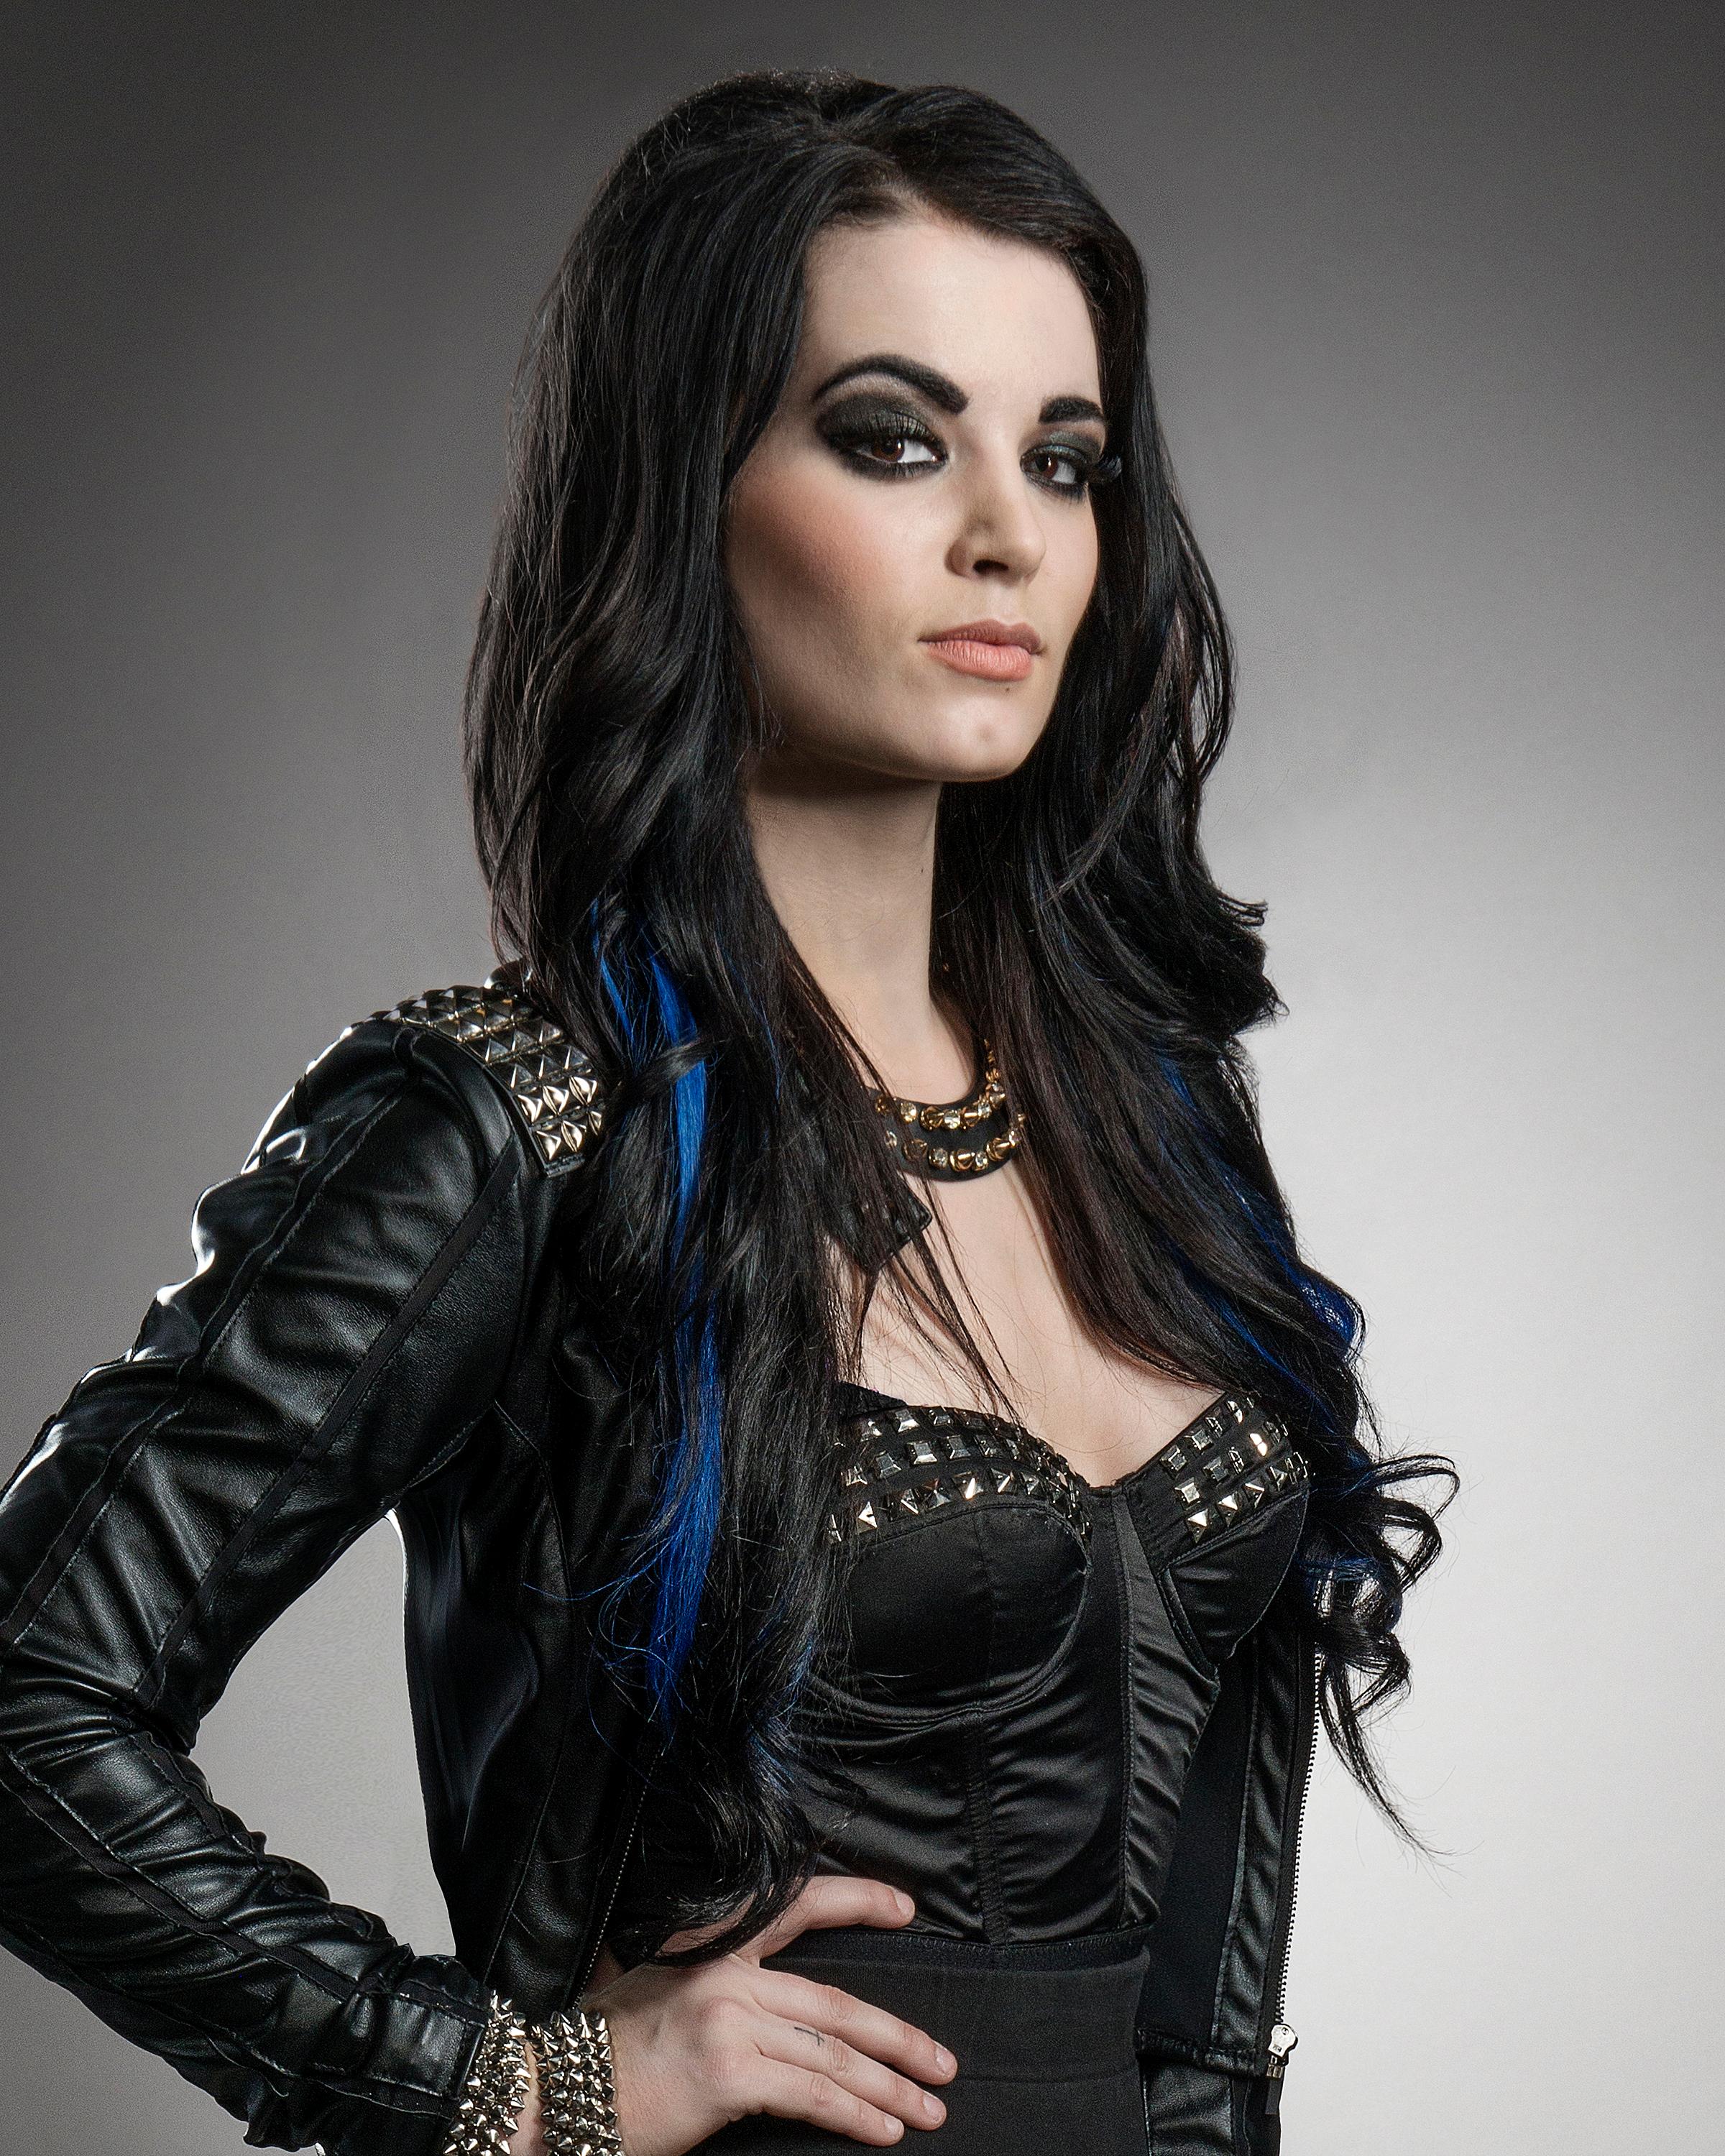 The Hardships of WWE Star Paige